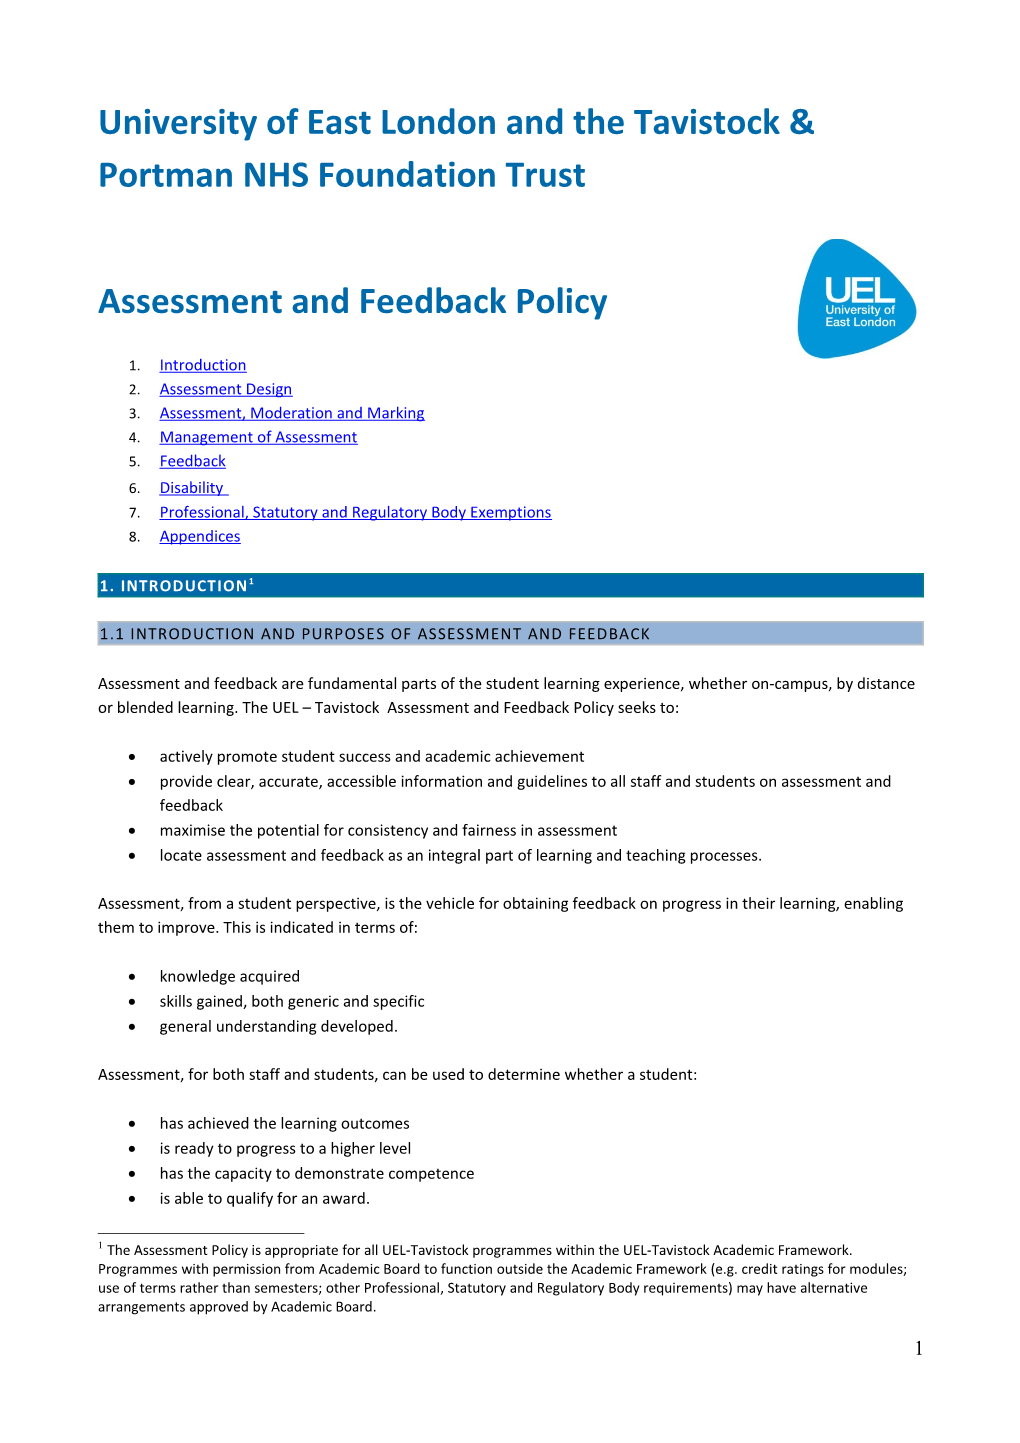 The Assessment Policy